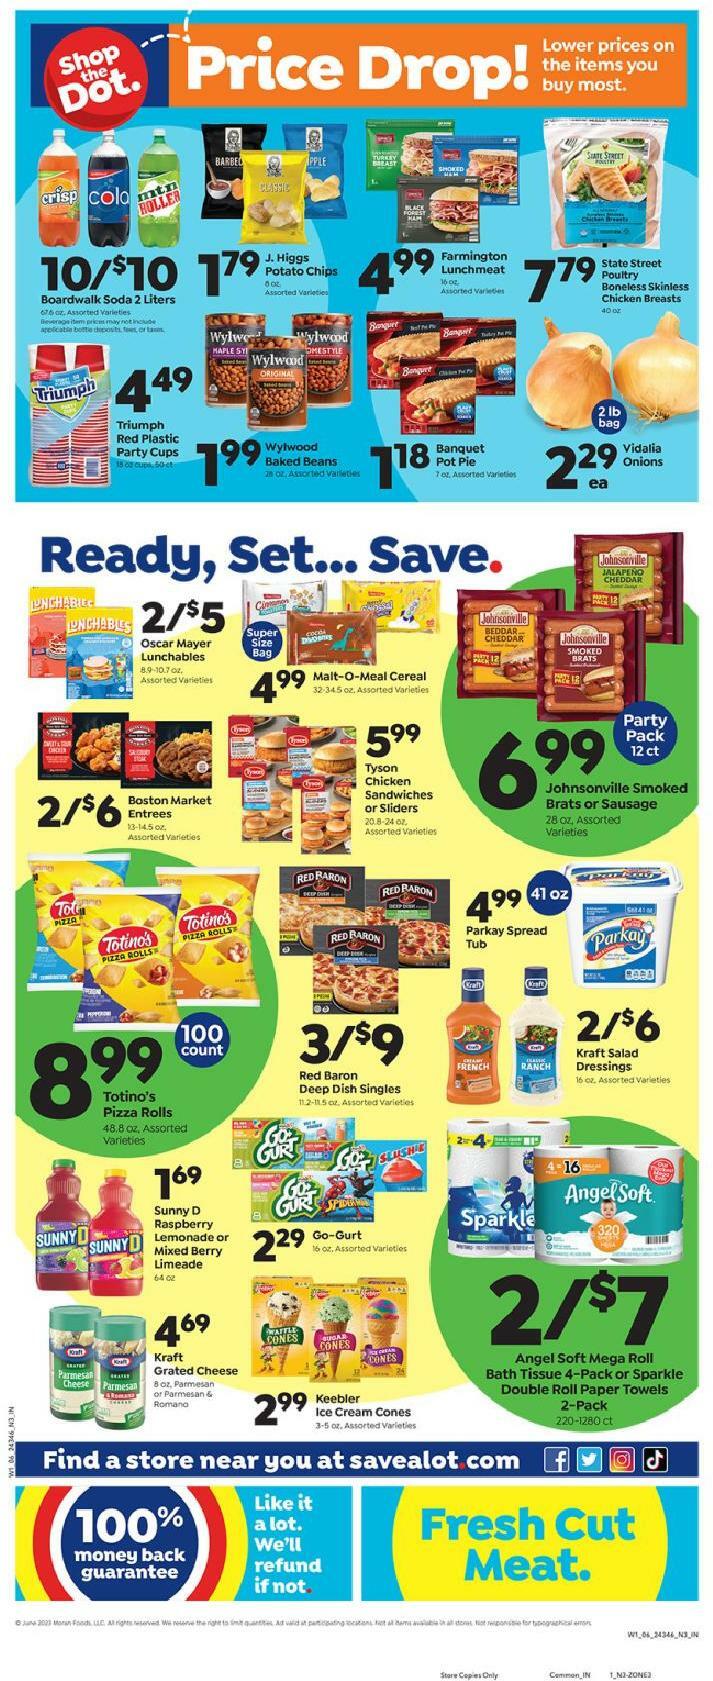 Save A Lot Weekly Ad from May 31